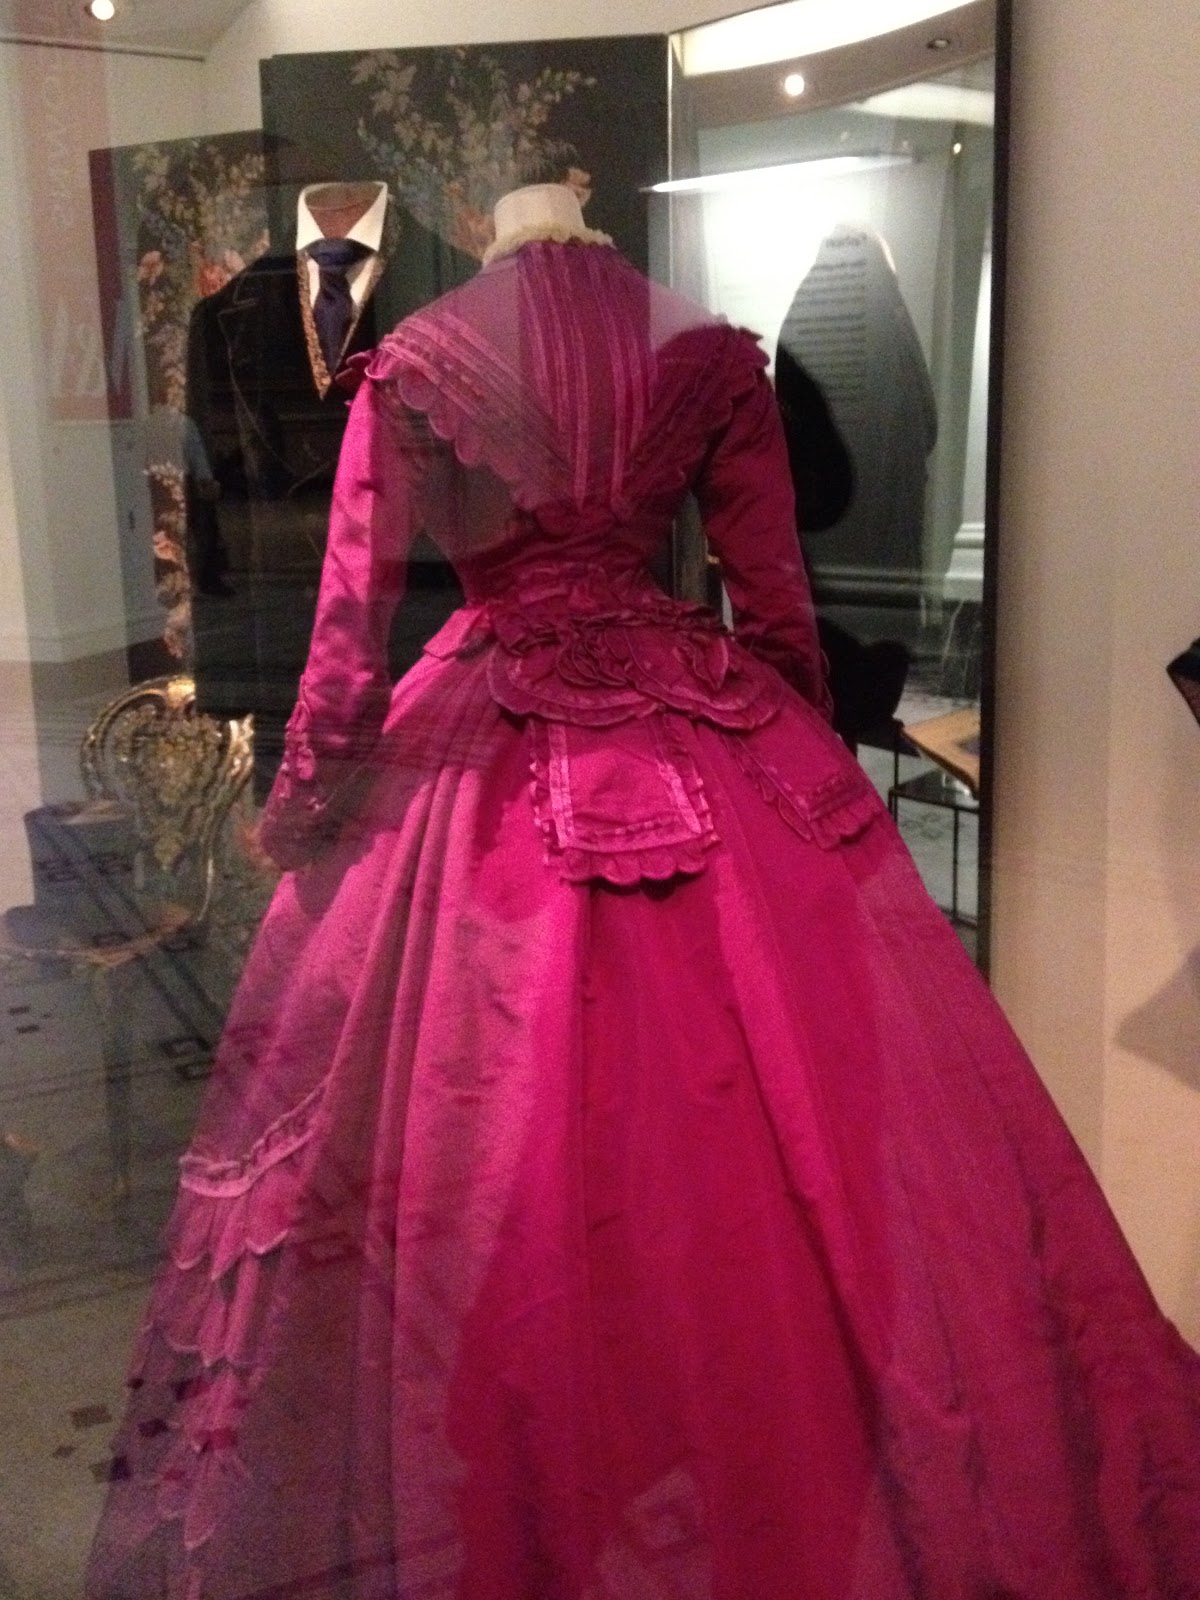 Dressed in Time: A Little Trip to The V&A